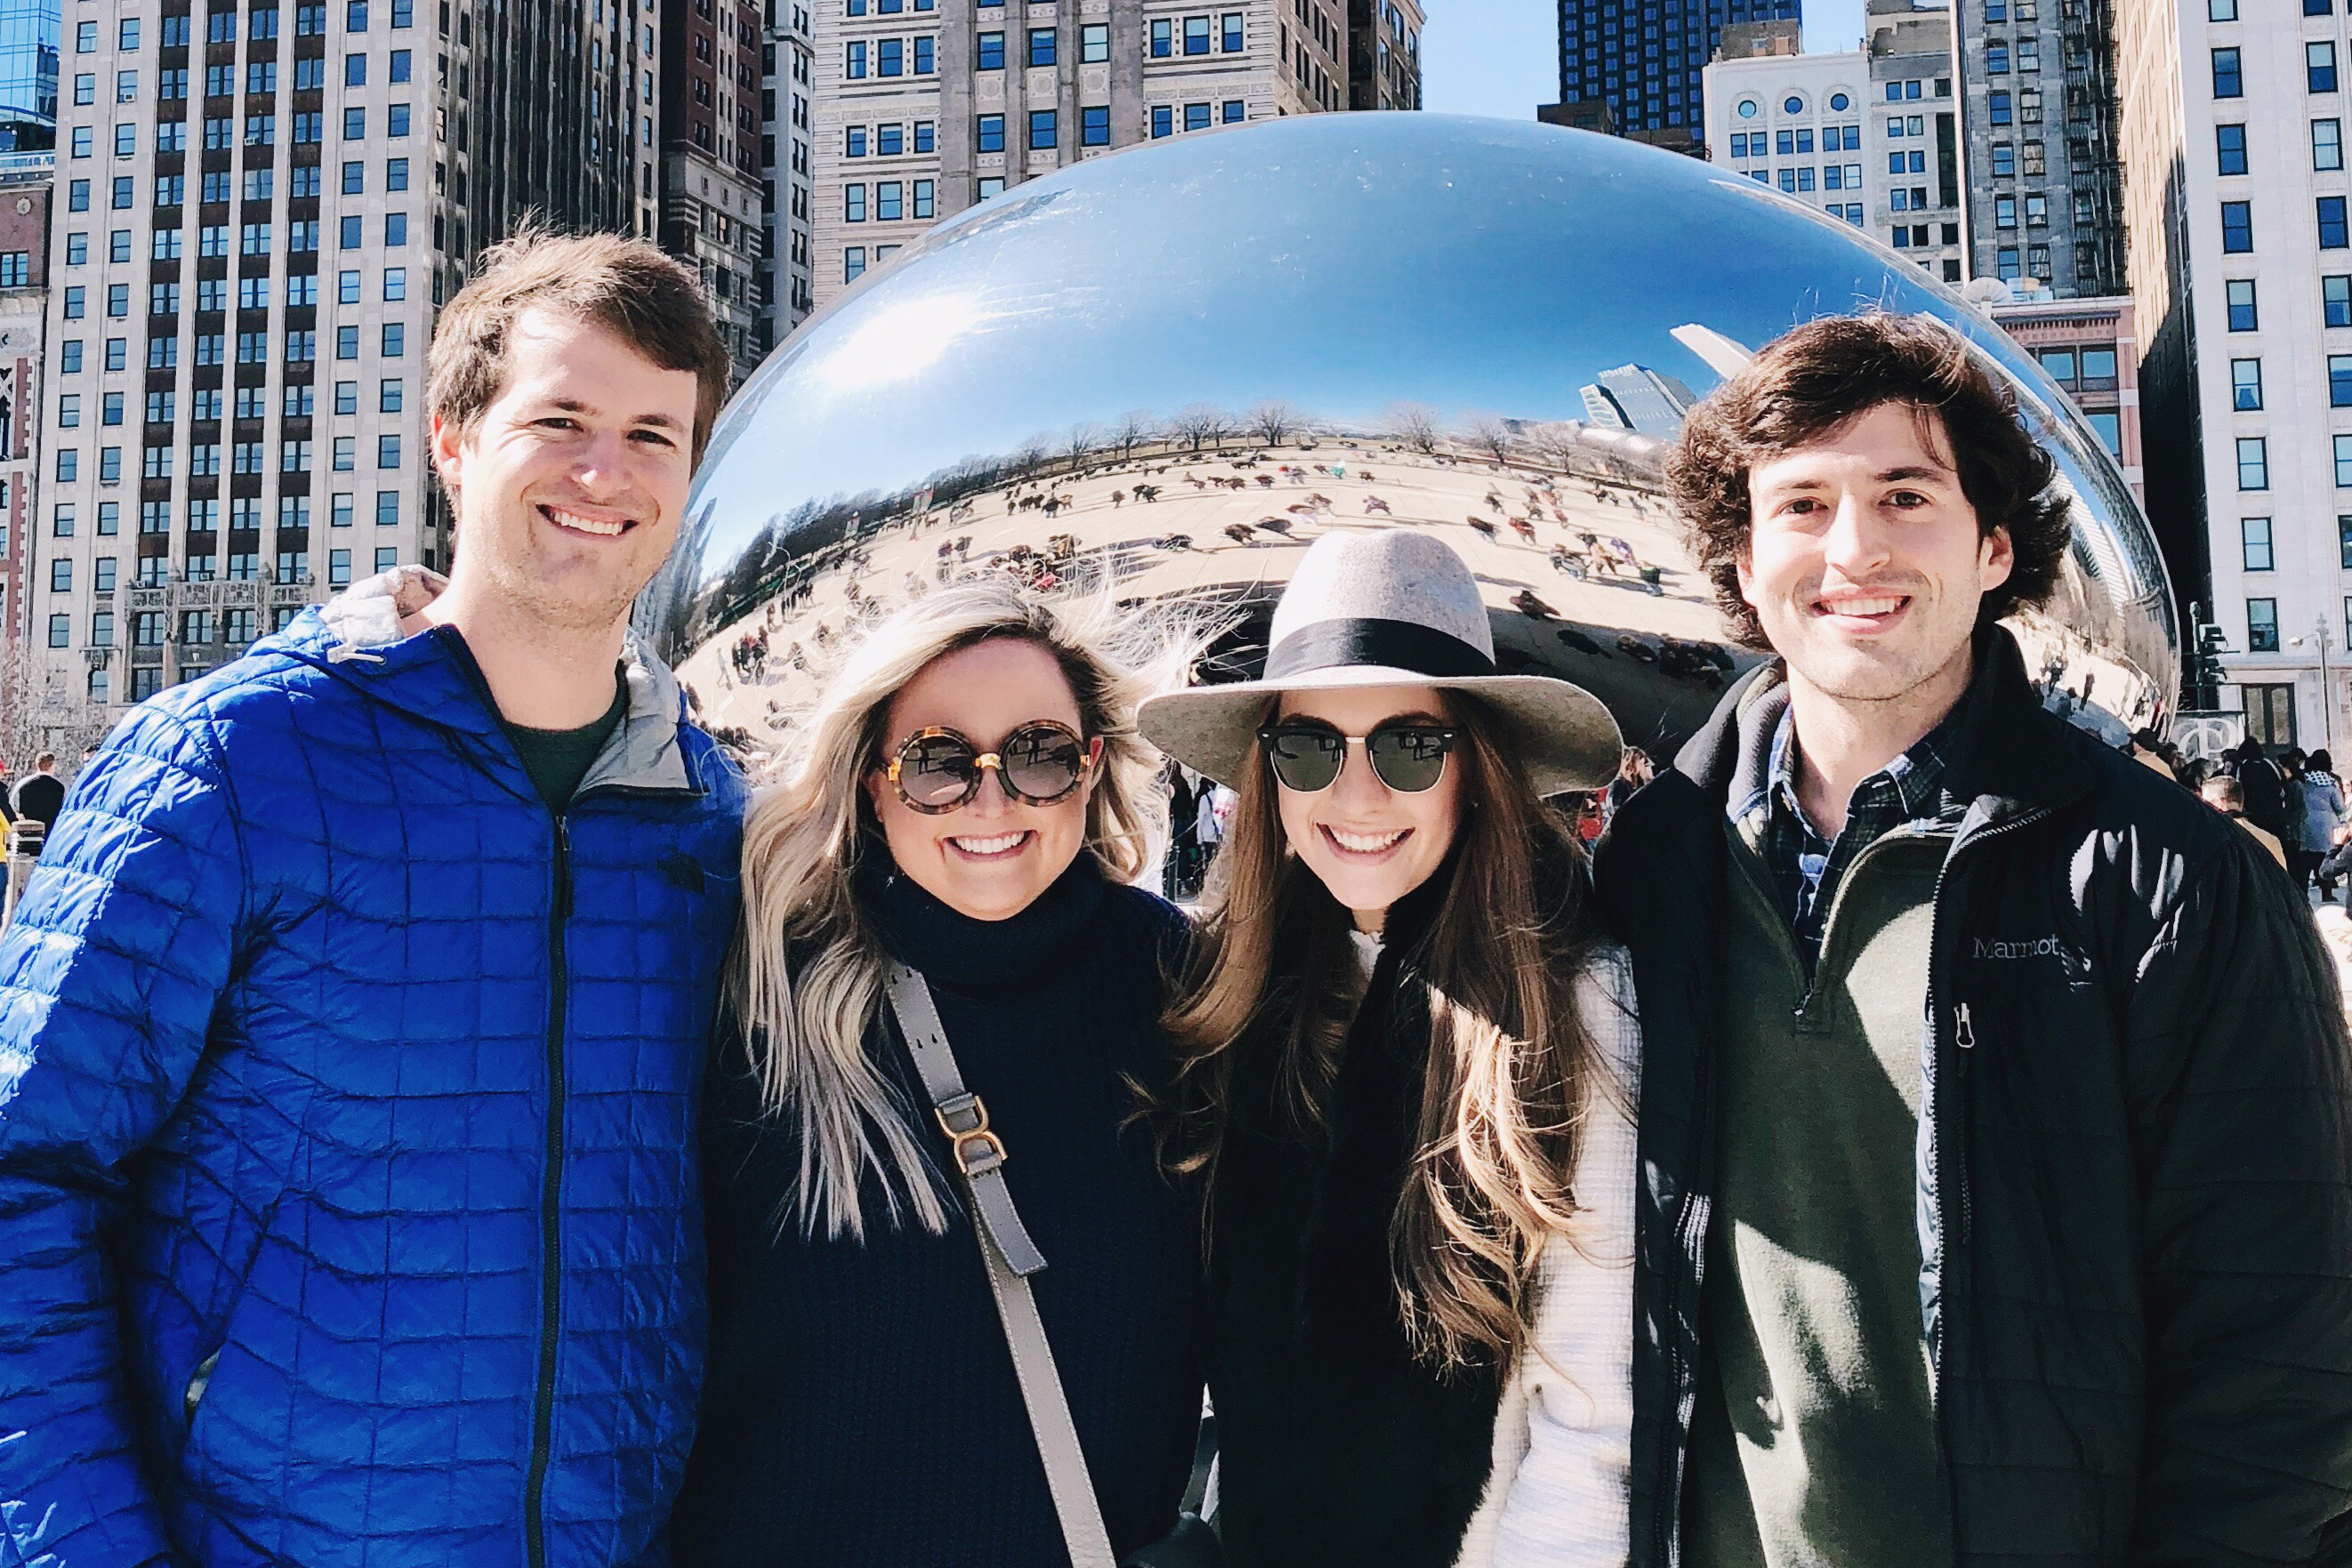 Things to do in Chicago | Miss Madeline Rose